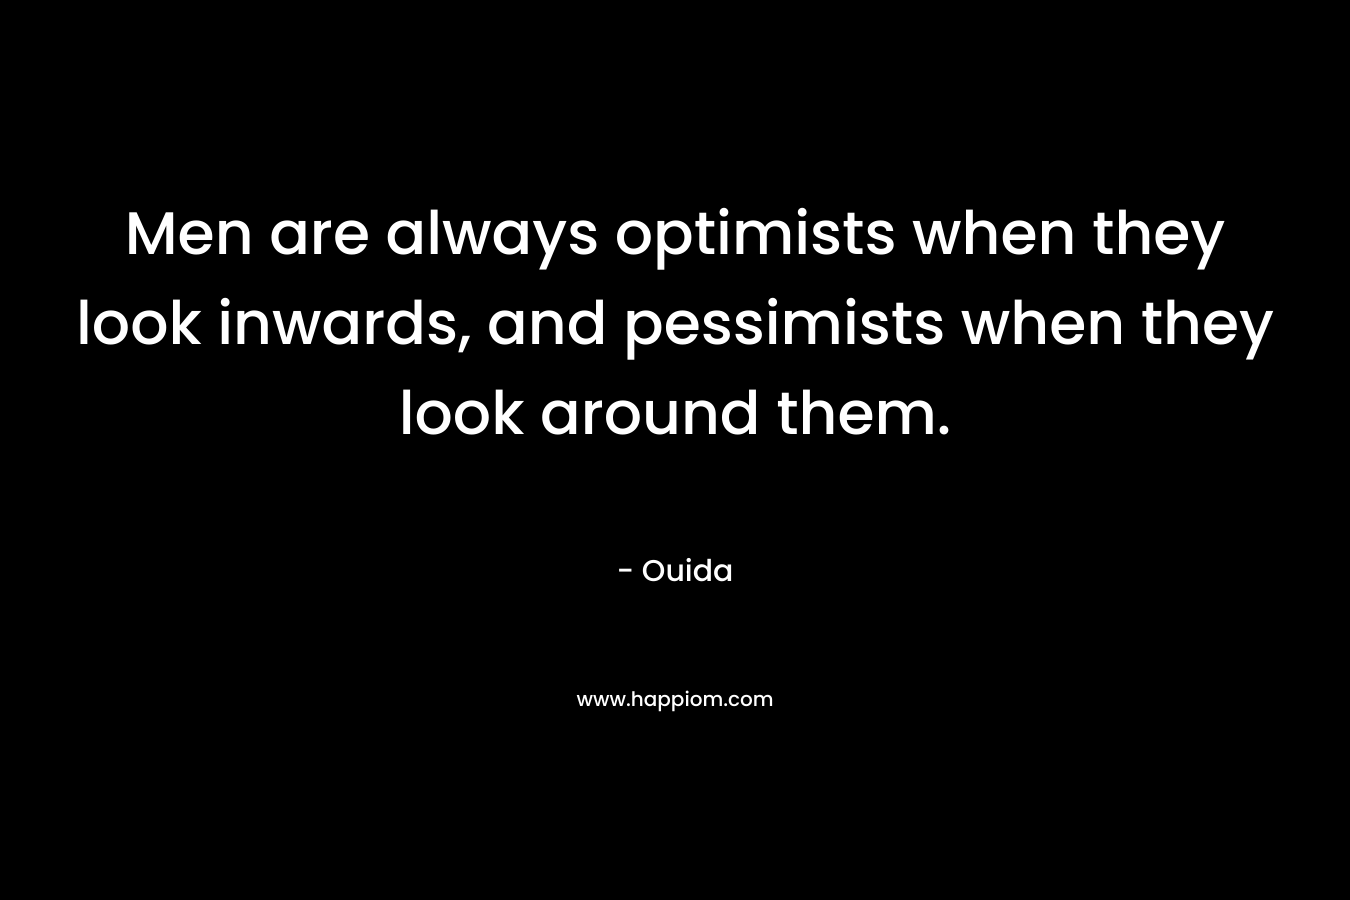 Men are always optimists when they look inwards, and pessimists when they look around them. – Ouida